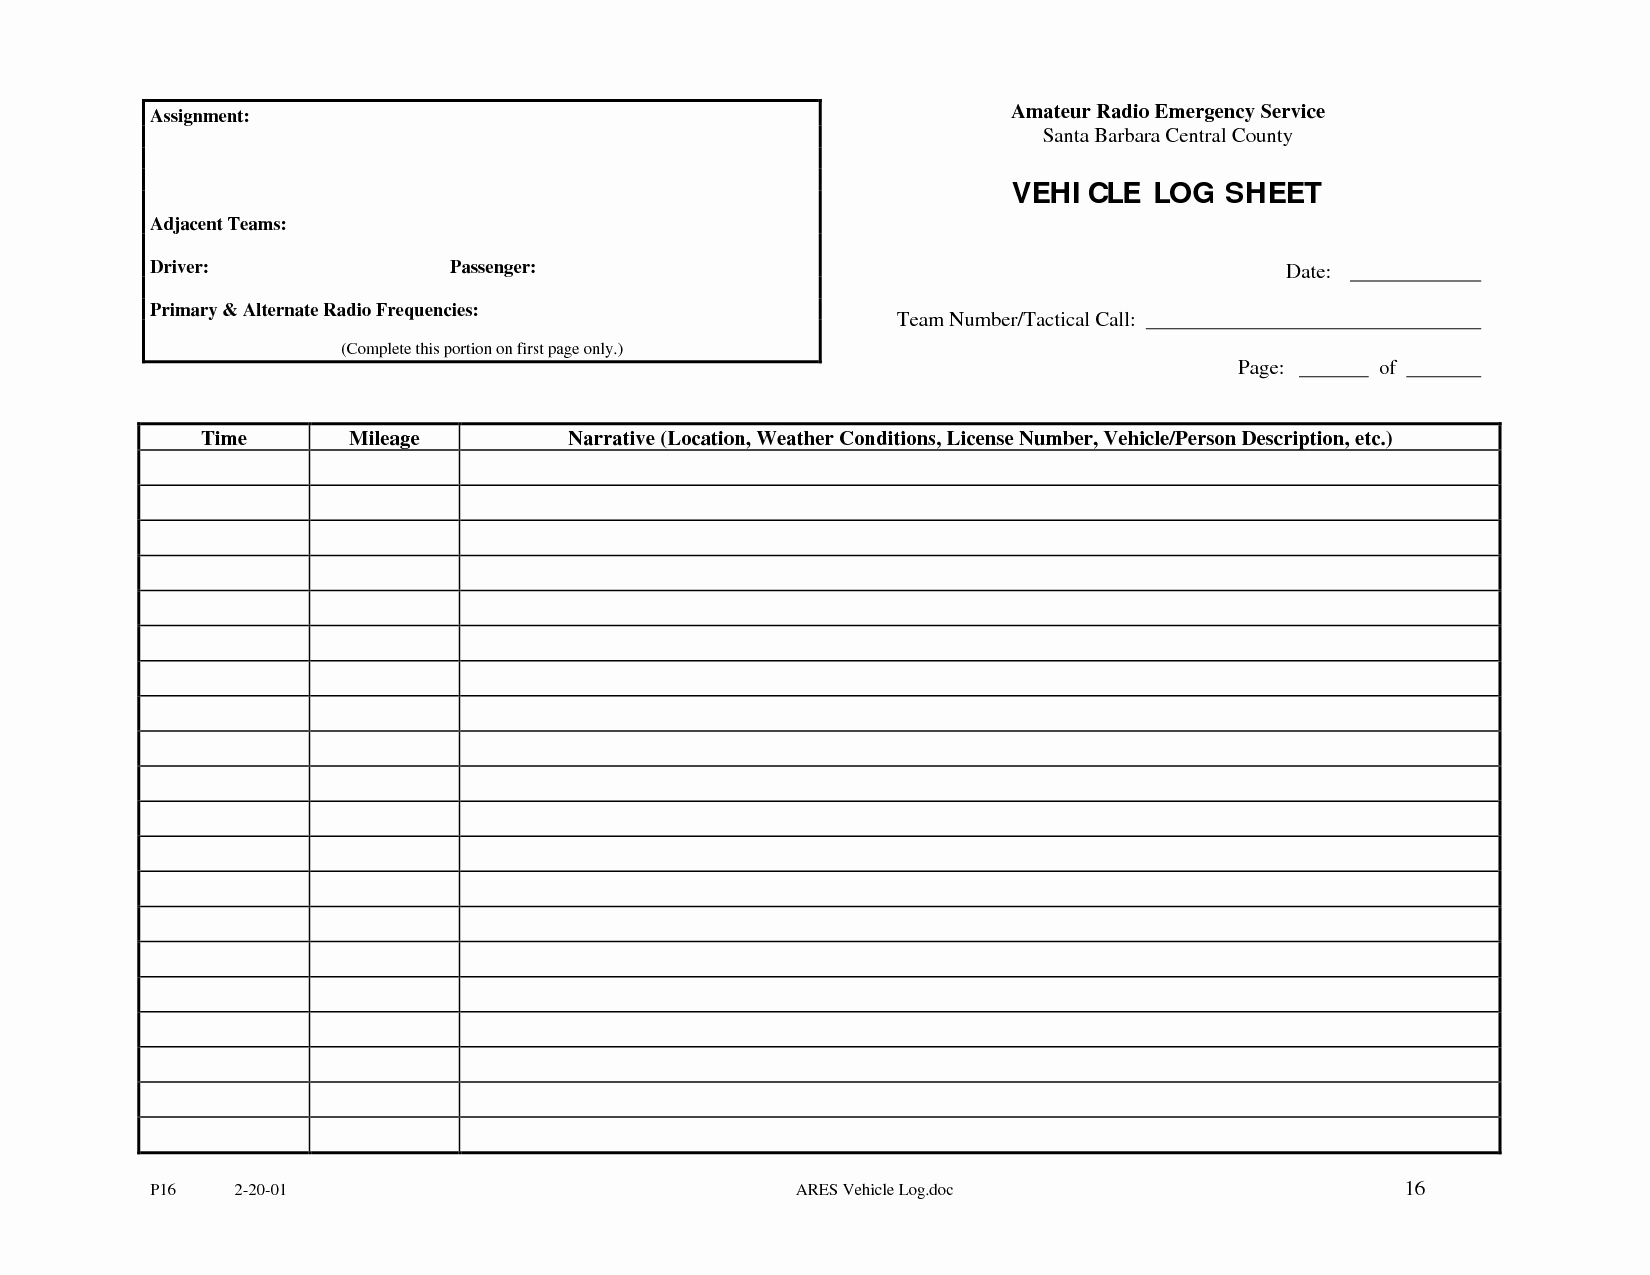 Drivers Log Sheet Template New Best S Of Drivers Log Sheet Driver Log Sheet Template Vehicle Log Sheet Template and Bus